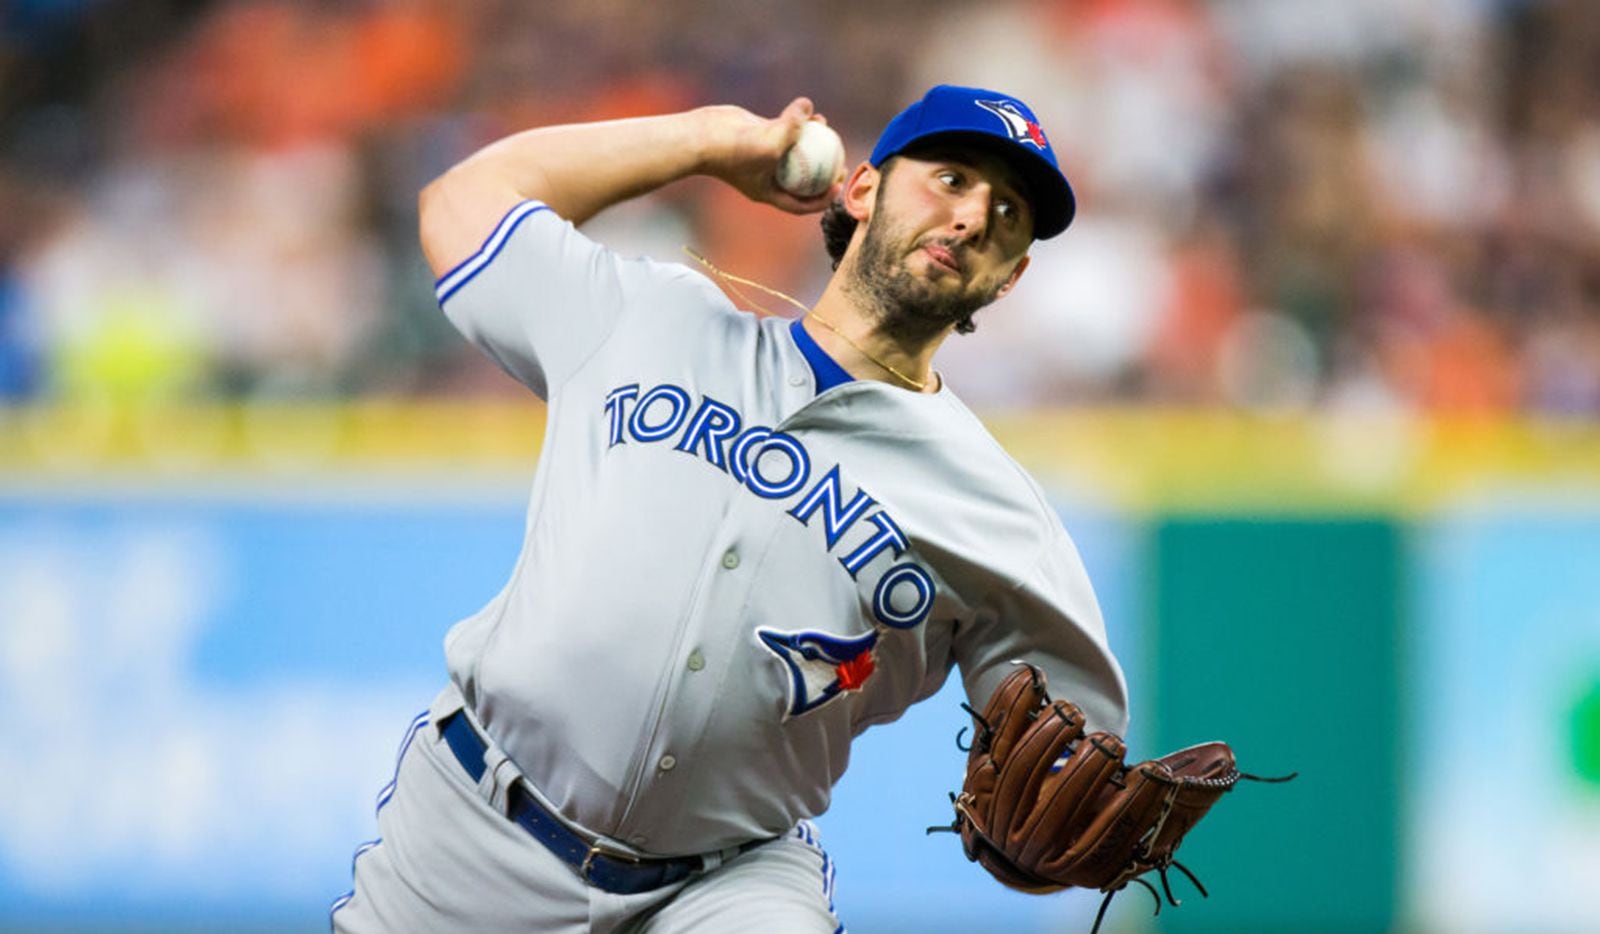 Toronto Blue Jays starting pitcher Mike Bolsinger (49) delivers the pitch in the fourth inning of a MLB game between the Houston Astros and the Toronto Blue Jays at Minute Maid Park, Friday, August 4, 2017. Houston Astros  defeated Toronto Blue Jays 16-7.